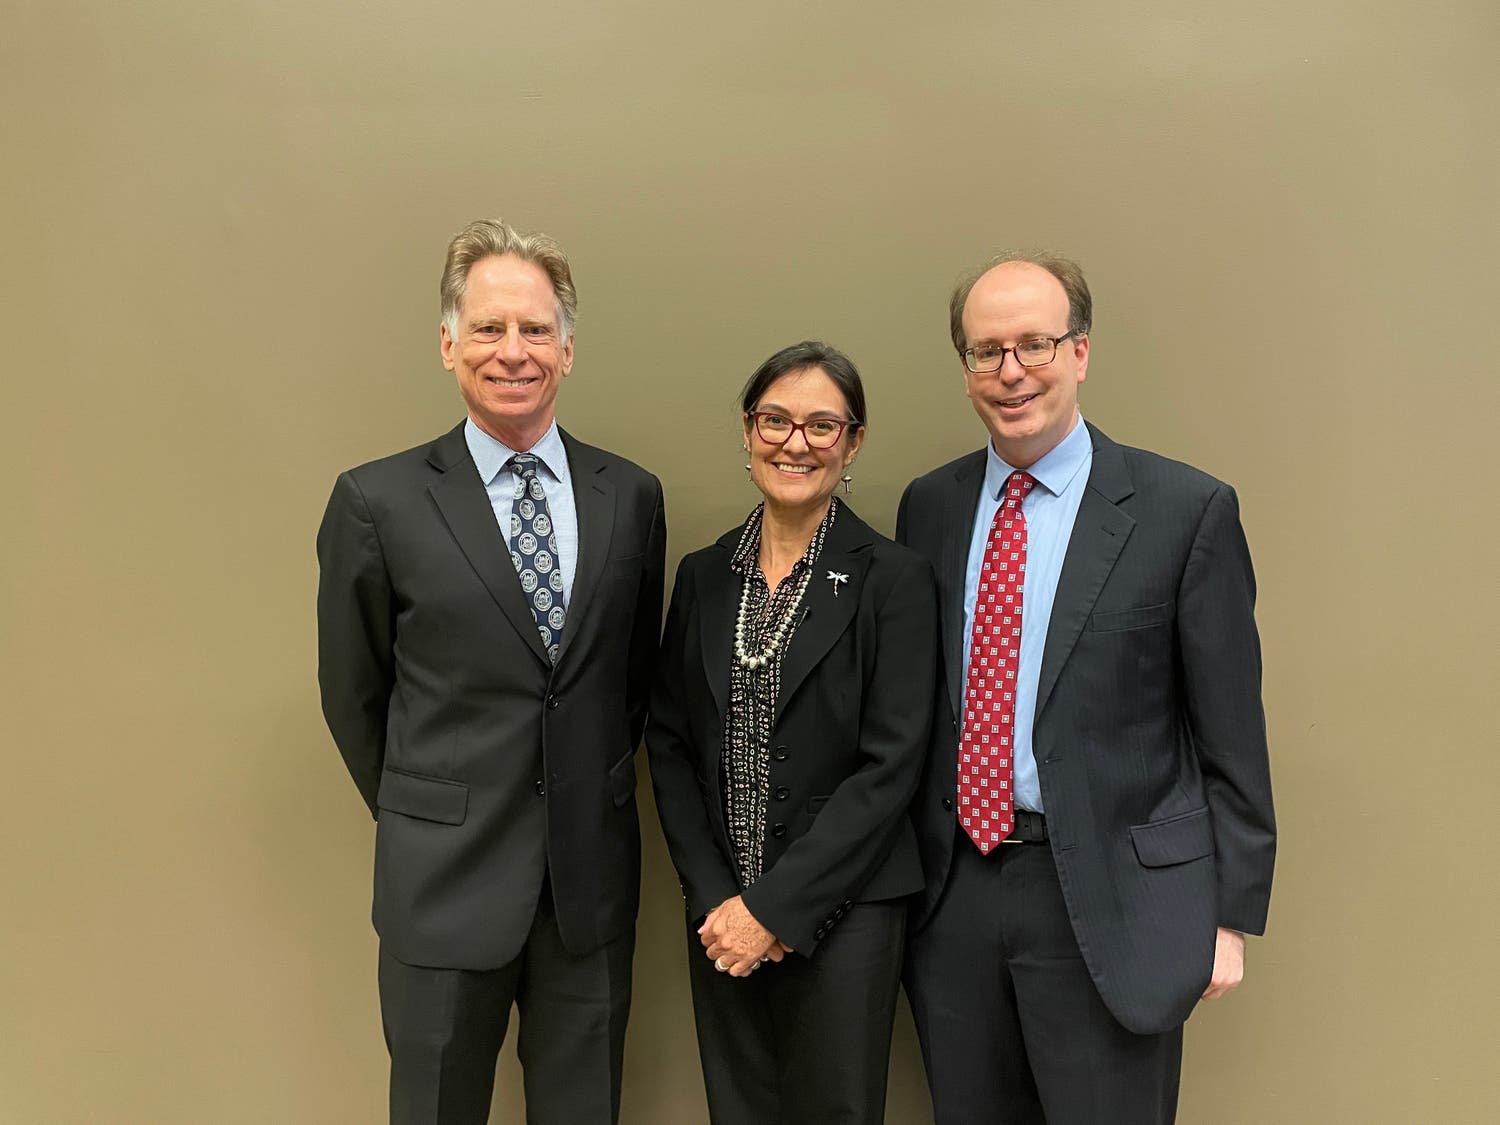 Roger Hart (2023-24 NEH Postdoctoral Fellow, Linda Hall Library), Shelly Lowe (Chair, National Endowment for the Humanities), and Benjamin Gross (Vice President for Research and Scholarship, Linda Hall Library)